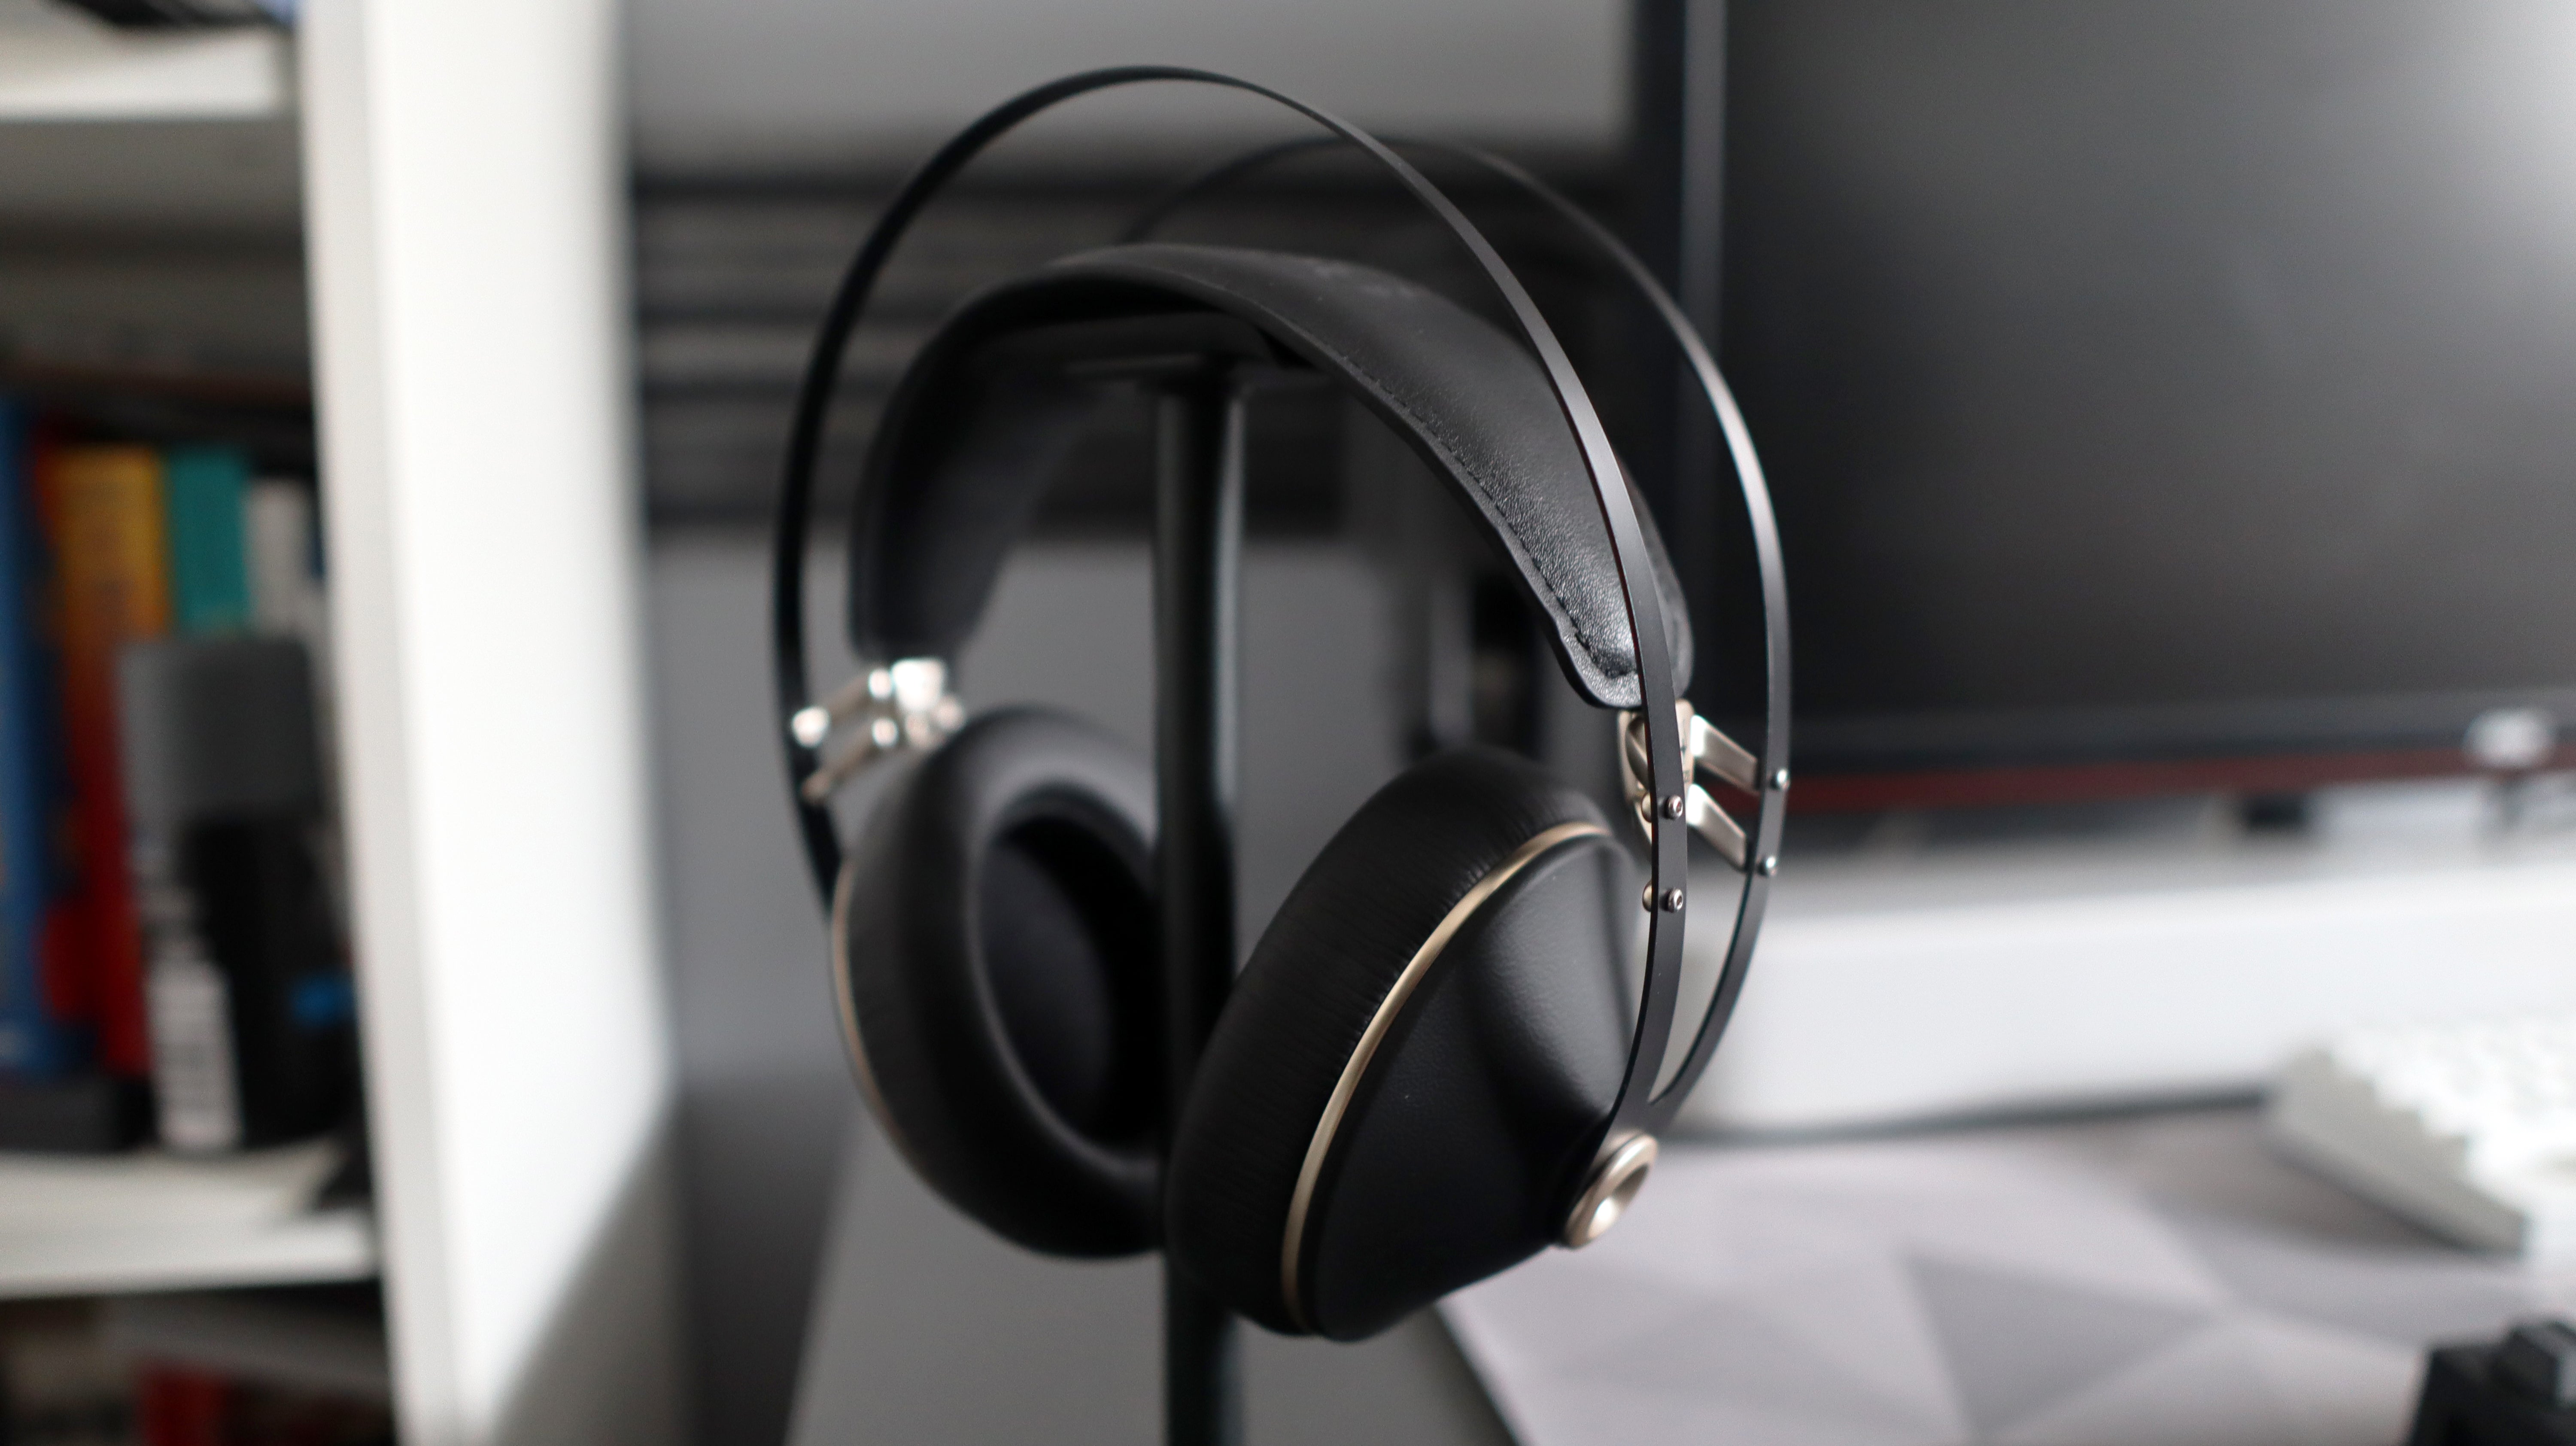 Meze 99 Neo review: stylish headphones with a warm, detailed sound 